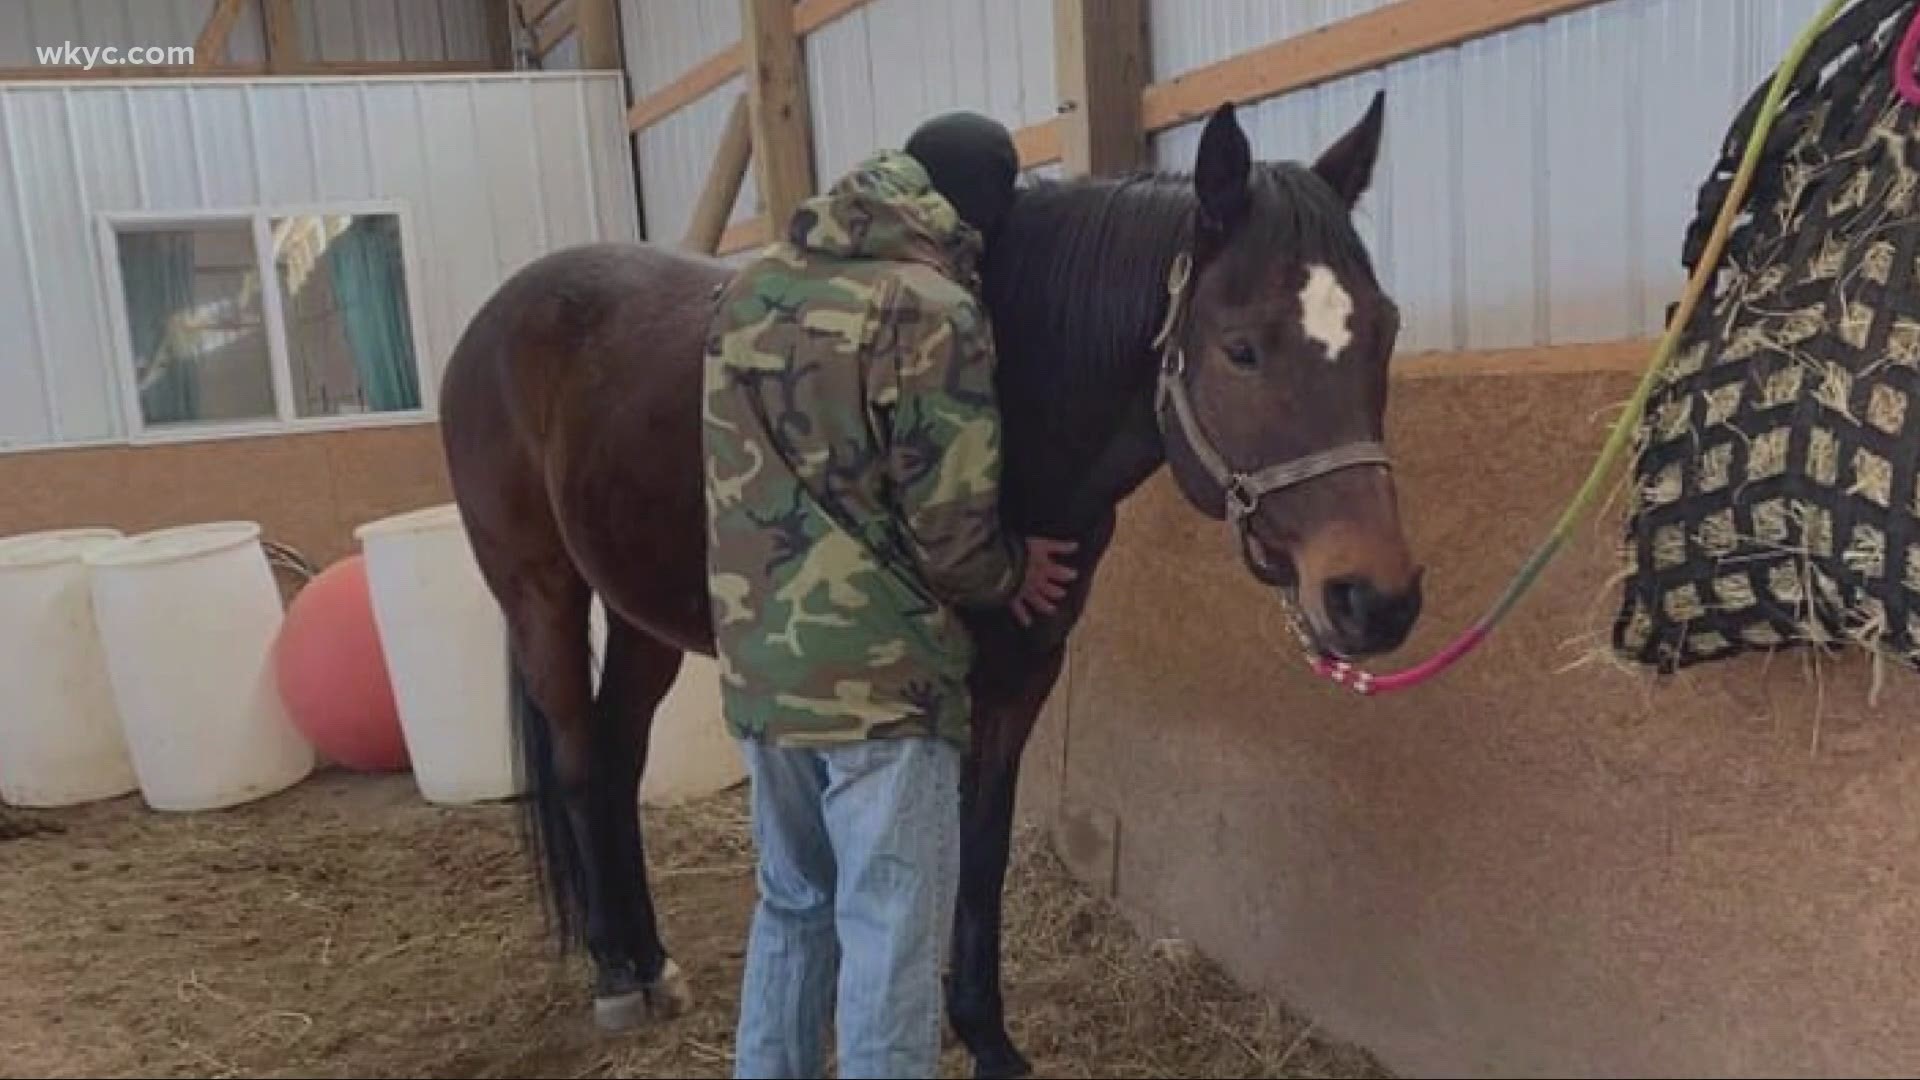 Michele Bolinger had a calling to rescue horses left behind. Without her, they never would be. Lindsay Buckingham reports.